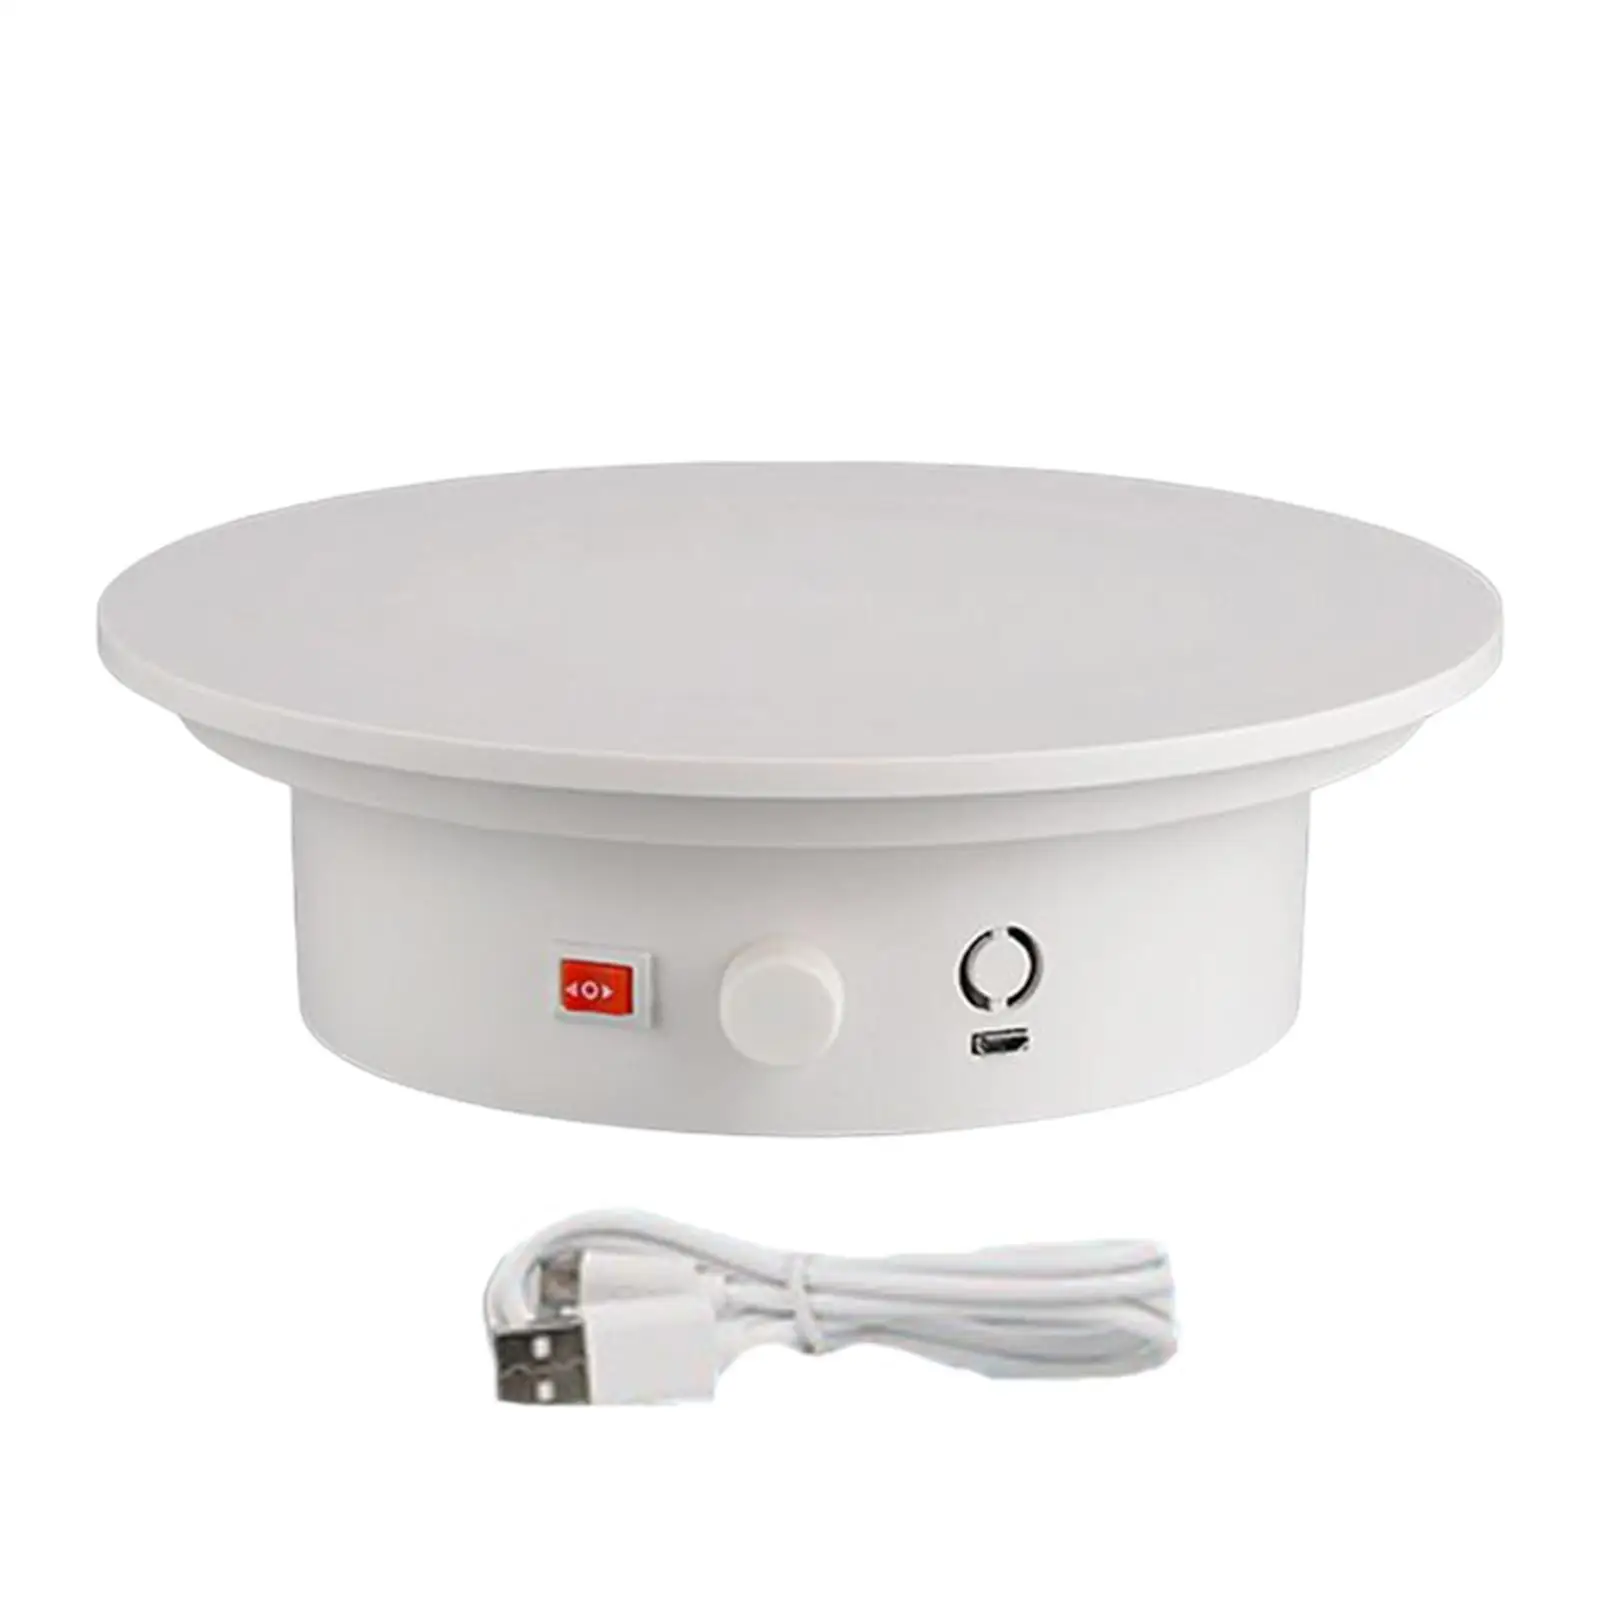 360 Degree Rotating Display Stand 200mm Display Table 15kg Load for Cake